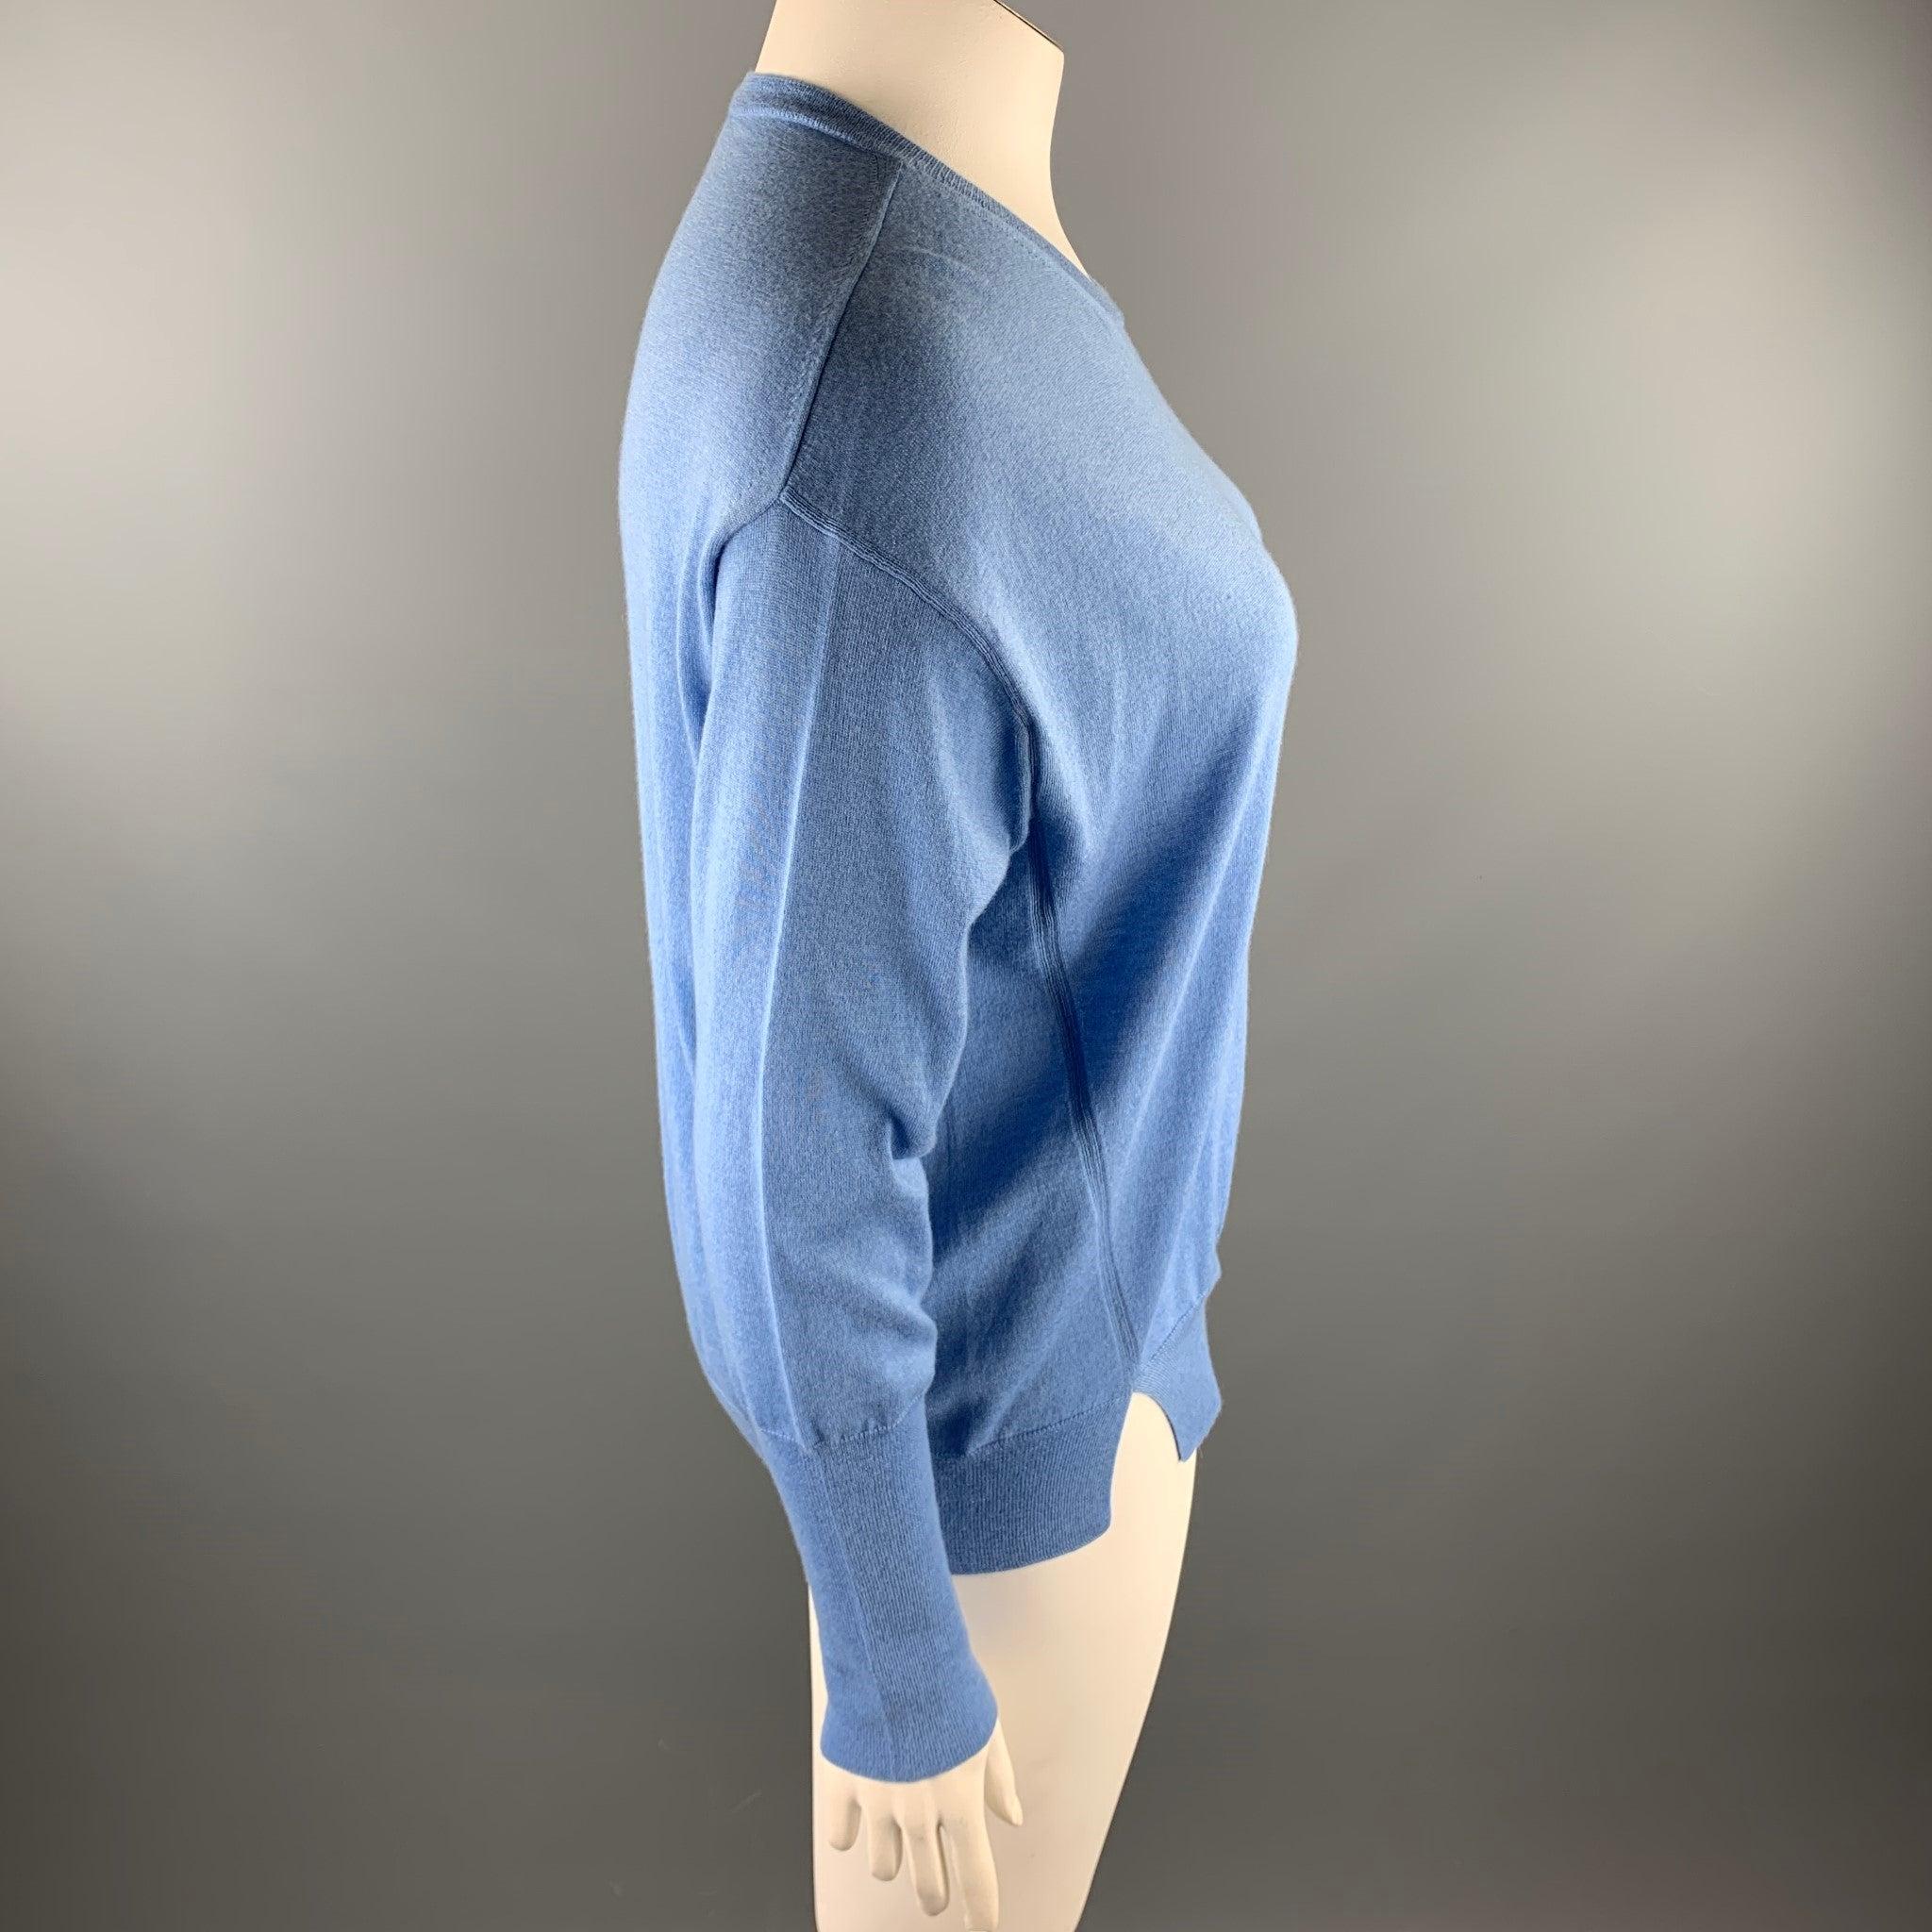 GIORGIO ARMANI pullover sweater comes in light blue cashmere knit with a round neck, slit waistband, and lone sleeves with extended cuff. Made in Italy.Excellent
Pre-Owned Condition. 

Marked:   EU 48 

Measurements: 
 
Shoulder:
23 inches Bust:
50